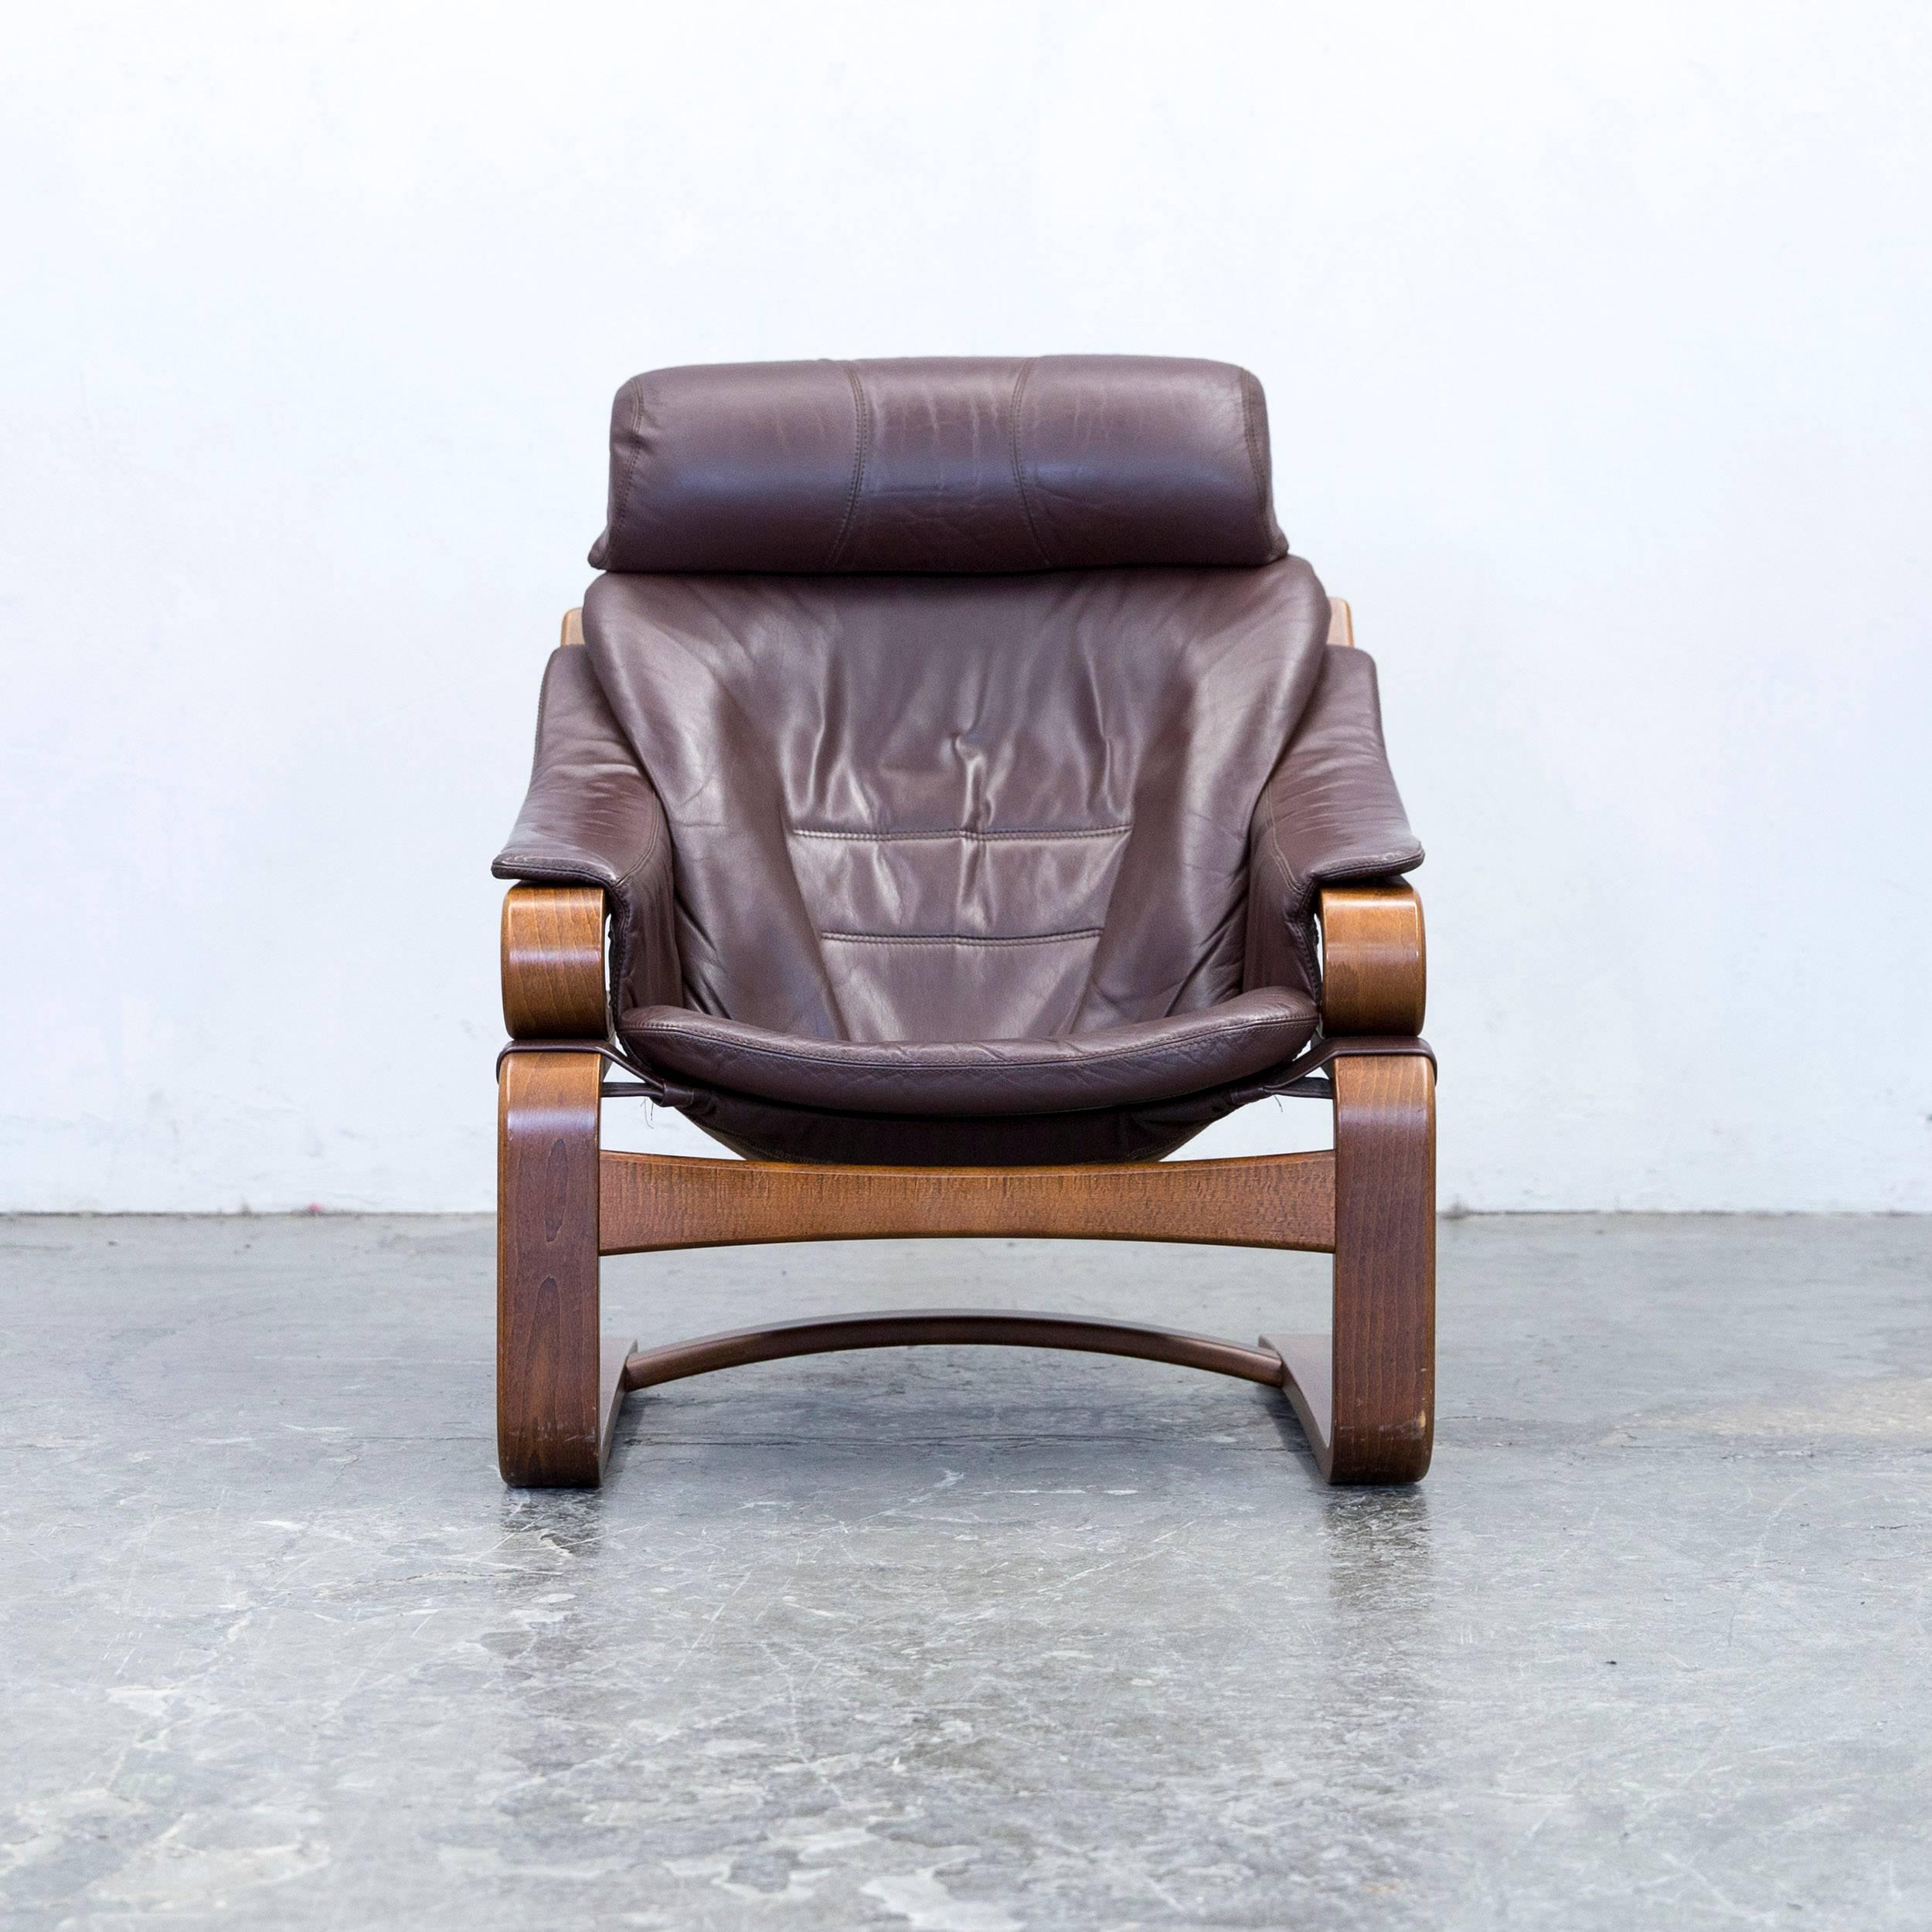 Brown colored designer leather armchair and footstool set, in a minimalistic and modern design, made for pure comfort.